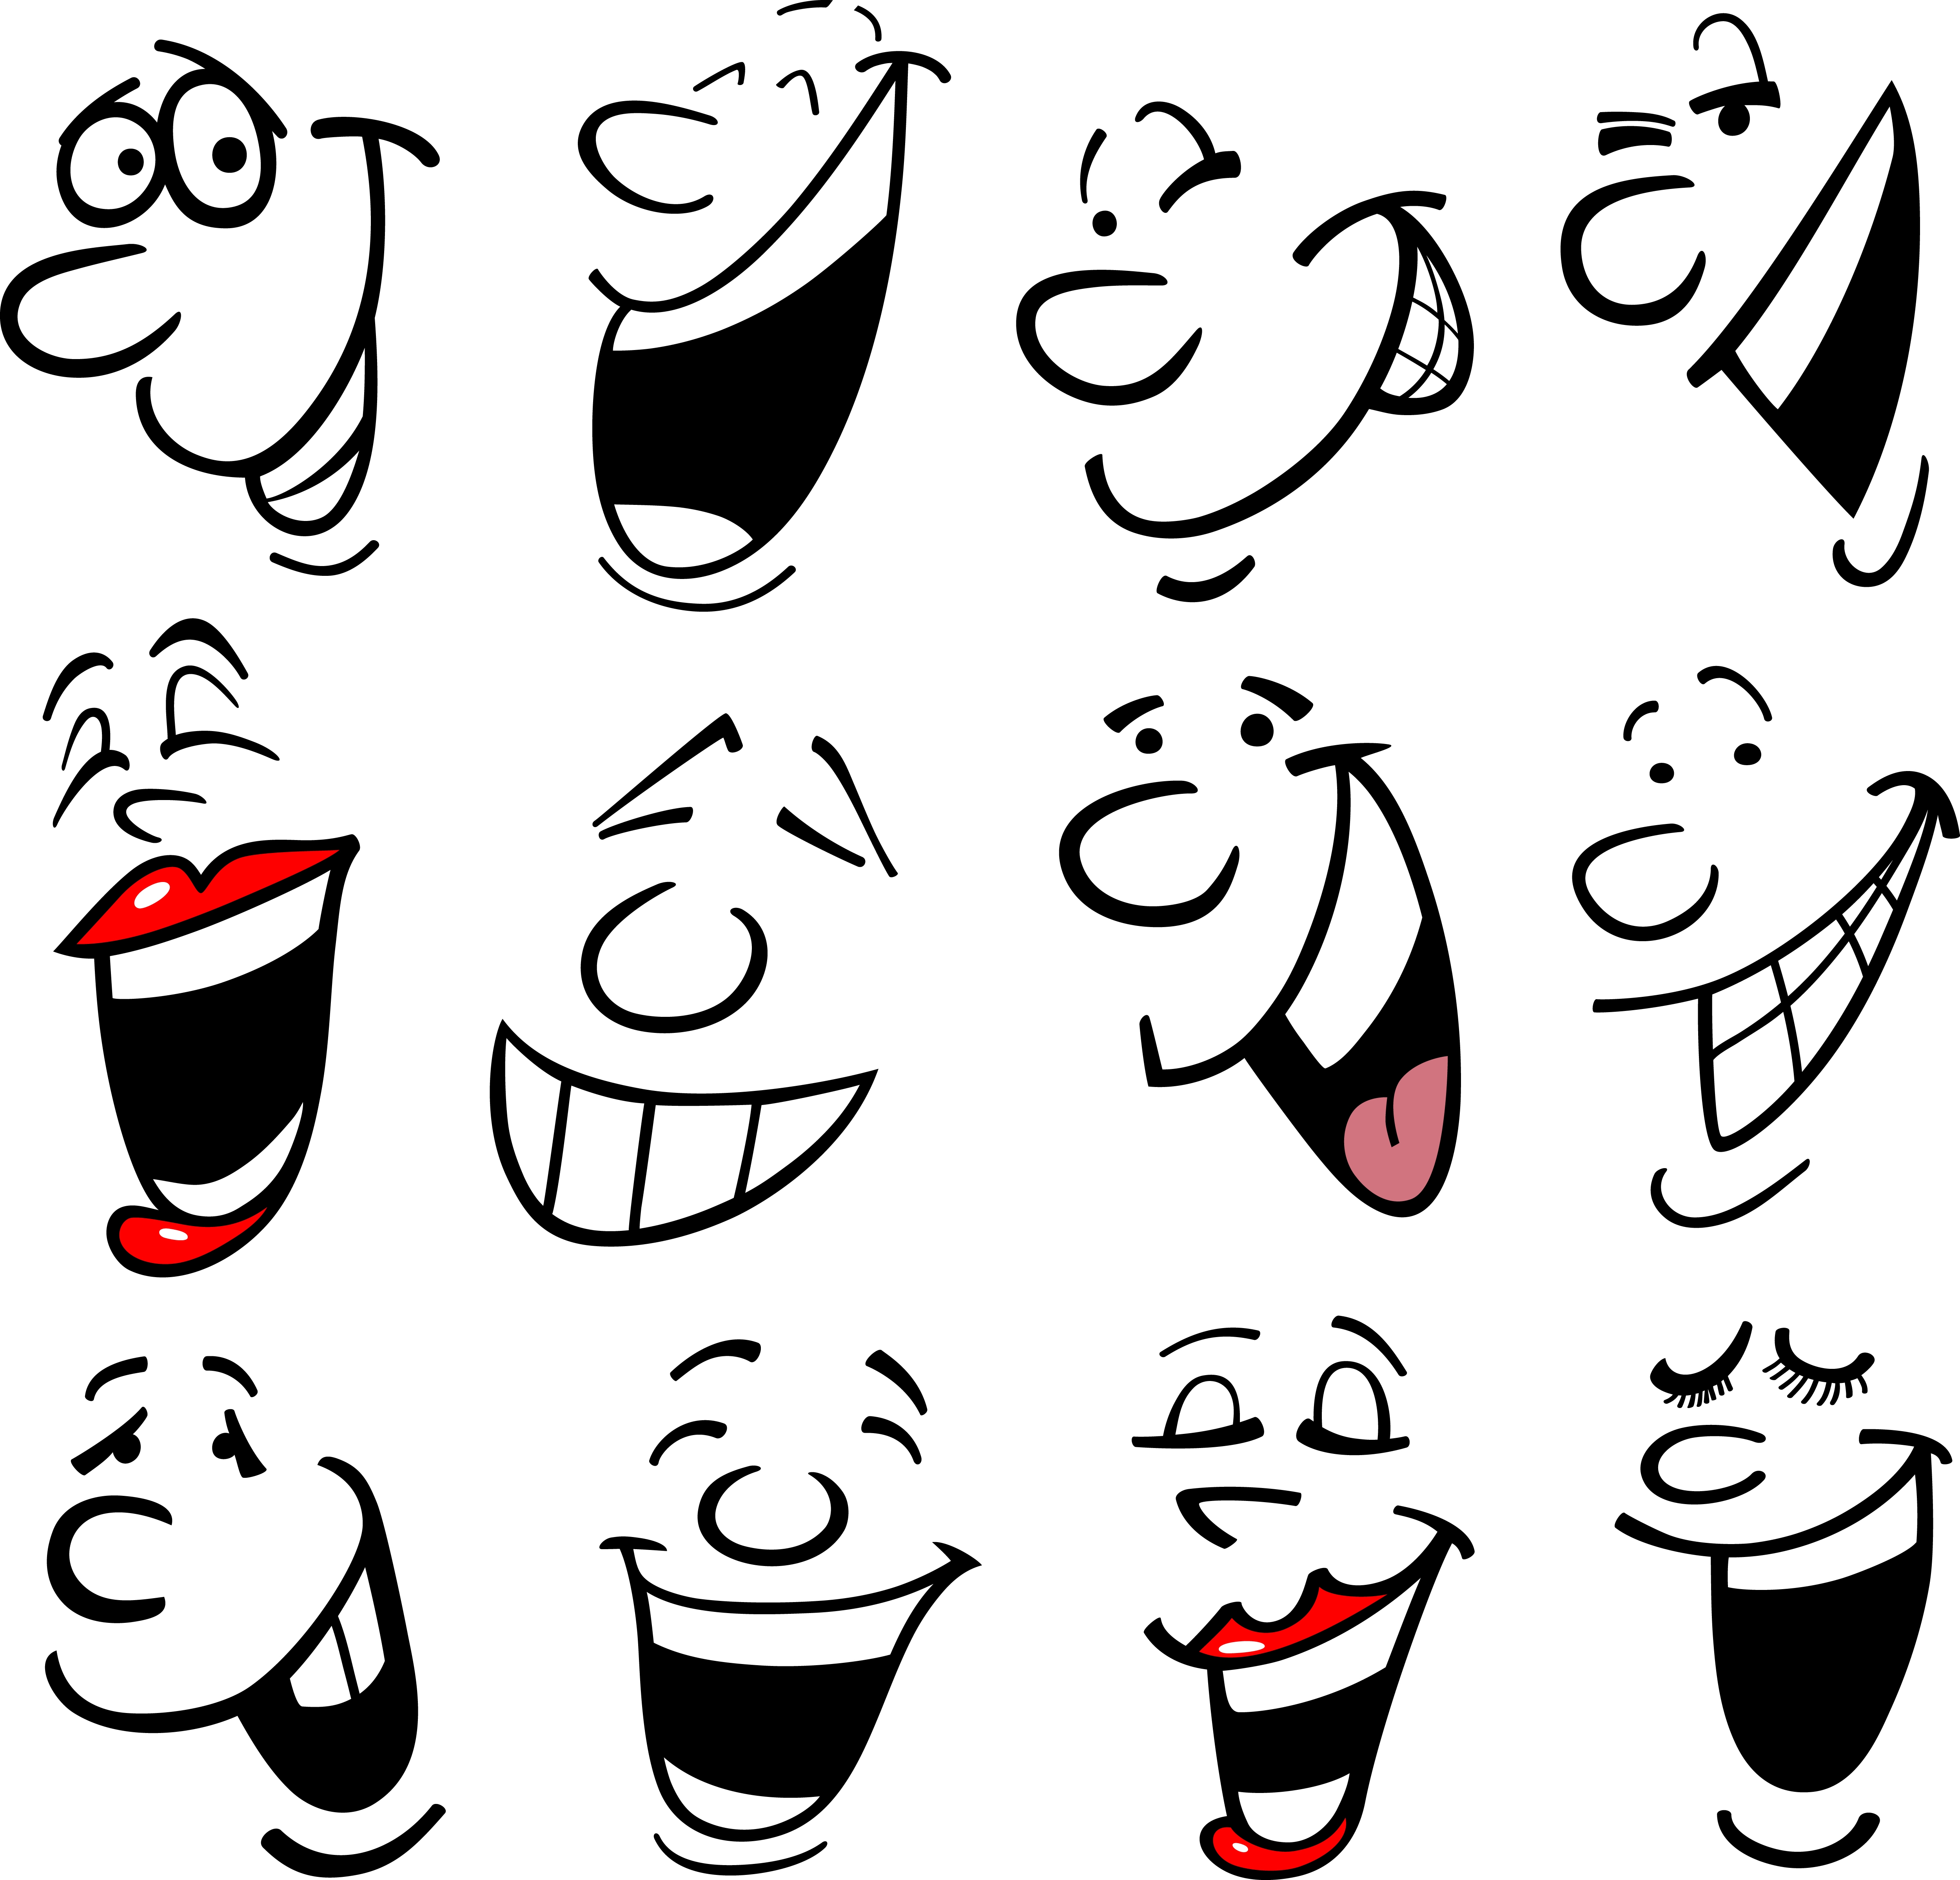 203,622 Cartoon Face Outline Royalty-Free Photos and Stock Images |  Shutterstock